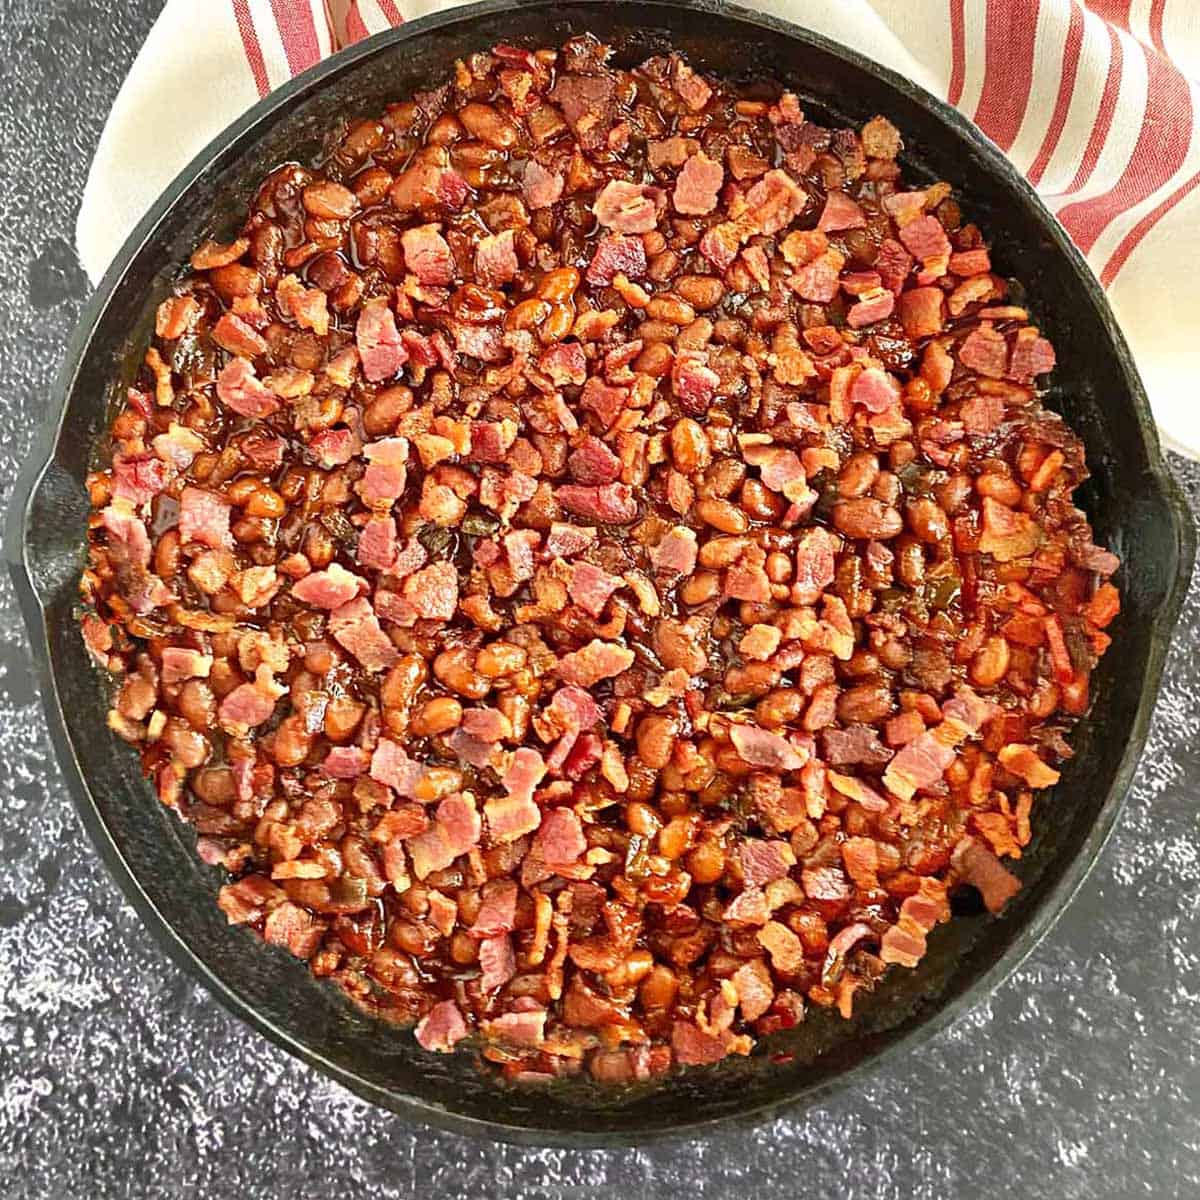 Smoked baked beans with bacon and brown sugar in a cast iron skillet.